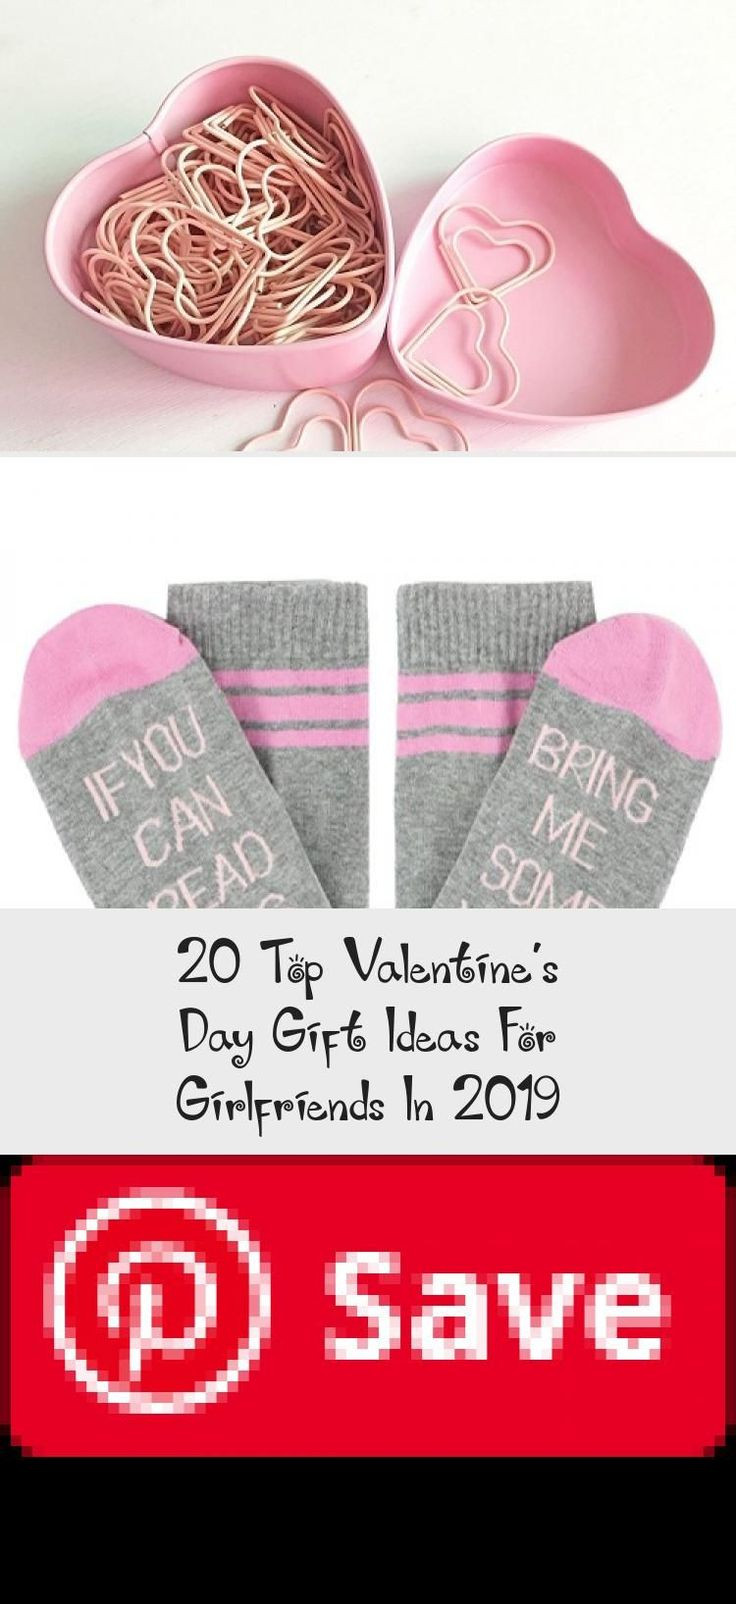 Ideas For Valentines Day 2019
 The 20 best Valentine s Day t ideas for friends in 2019